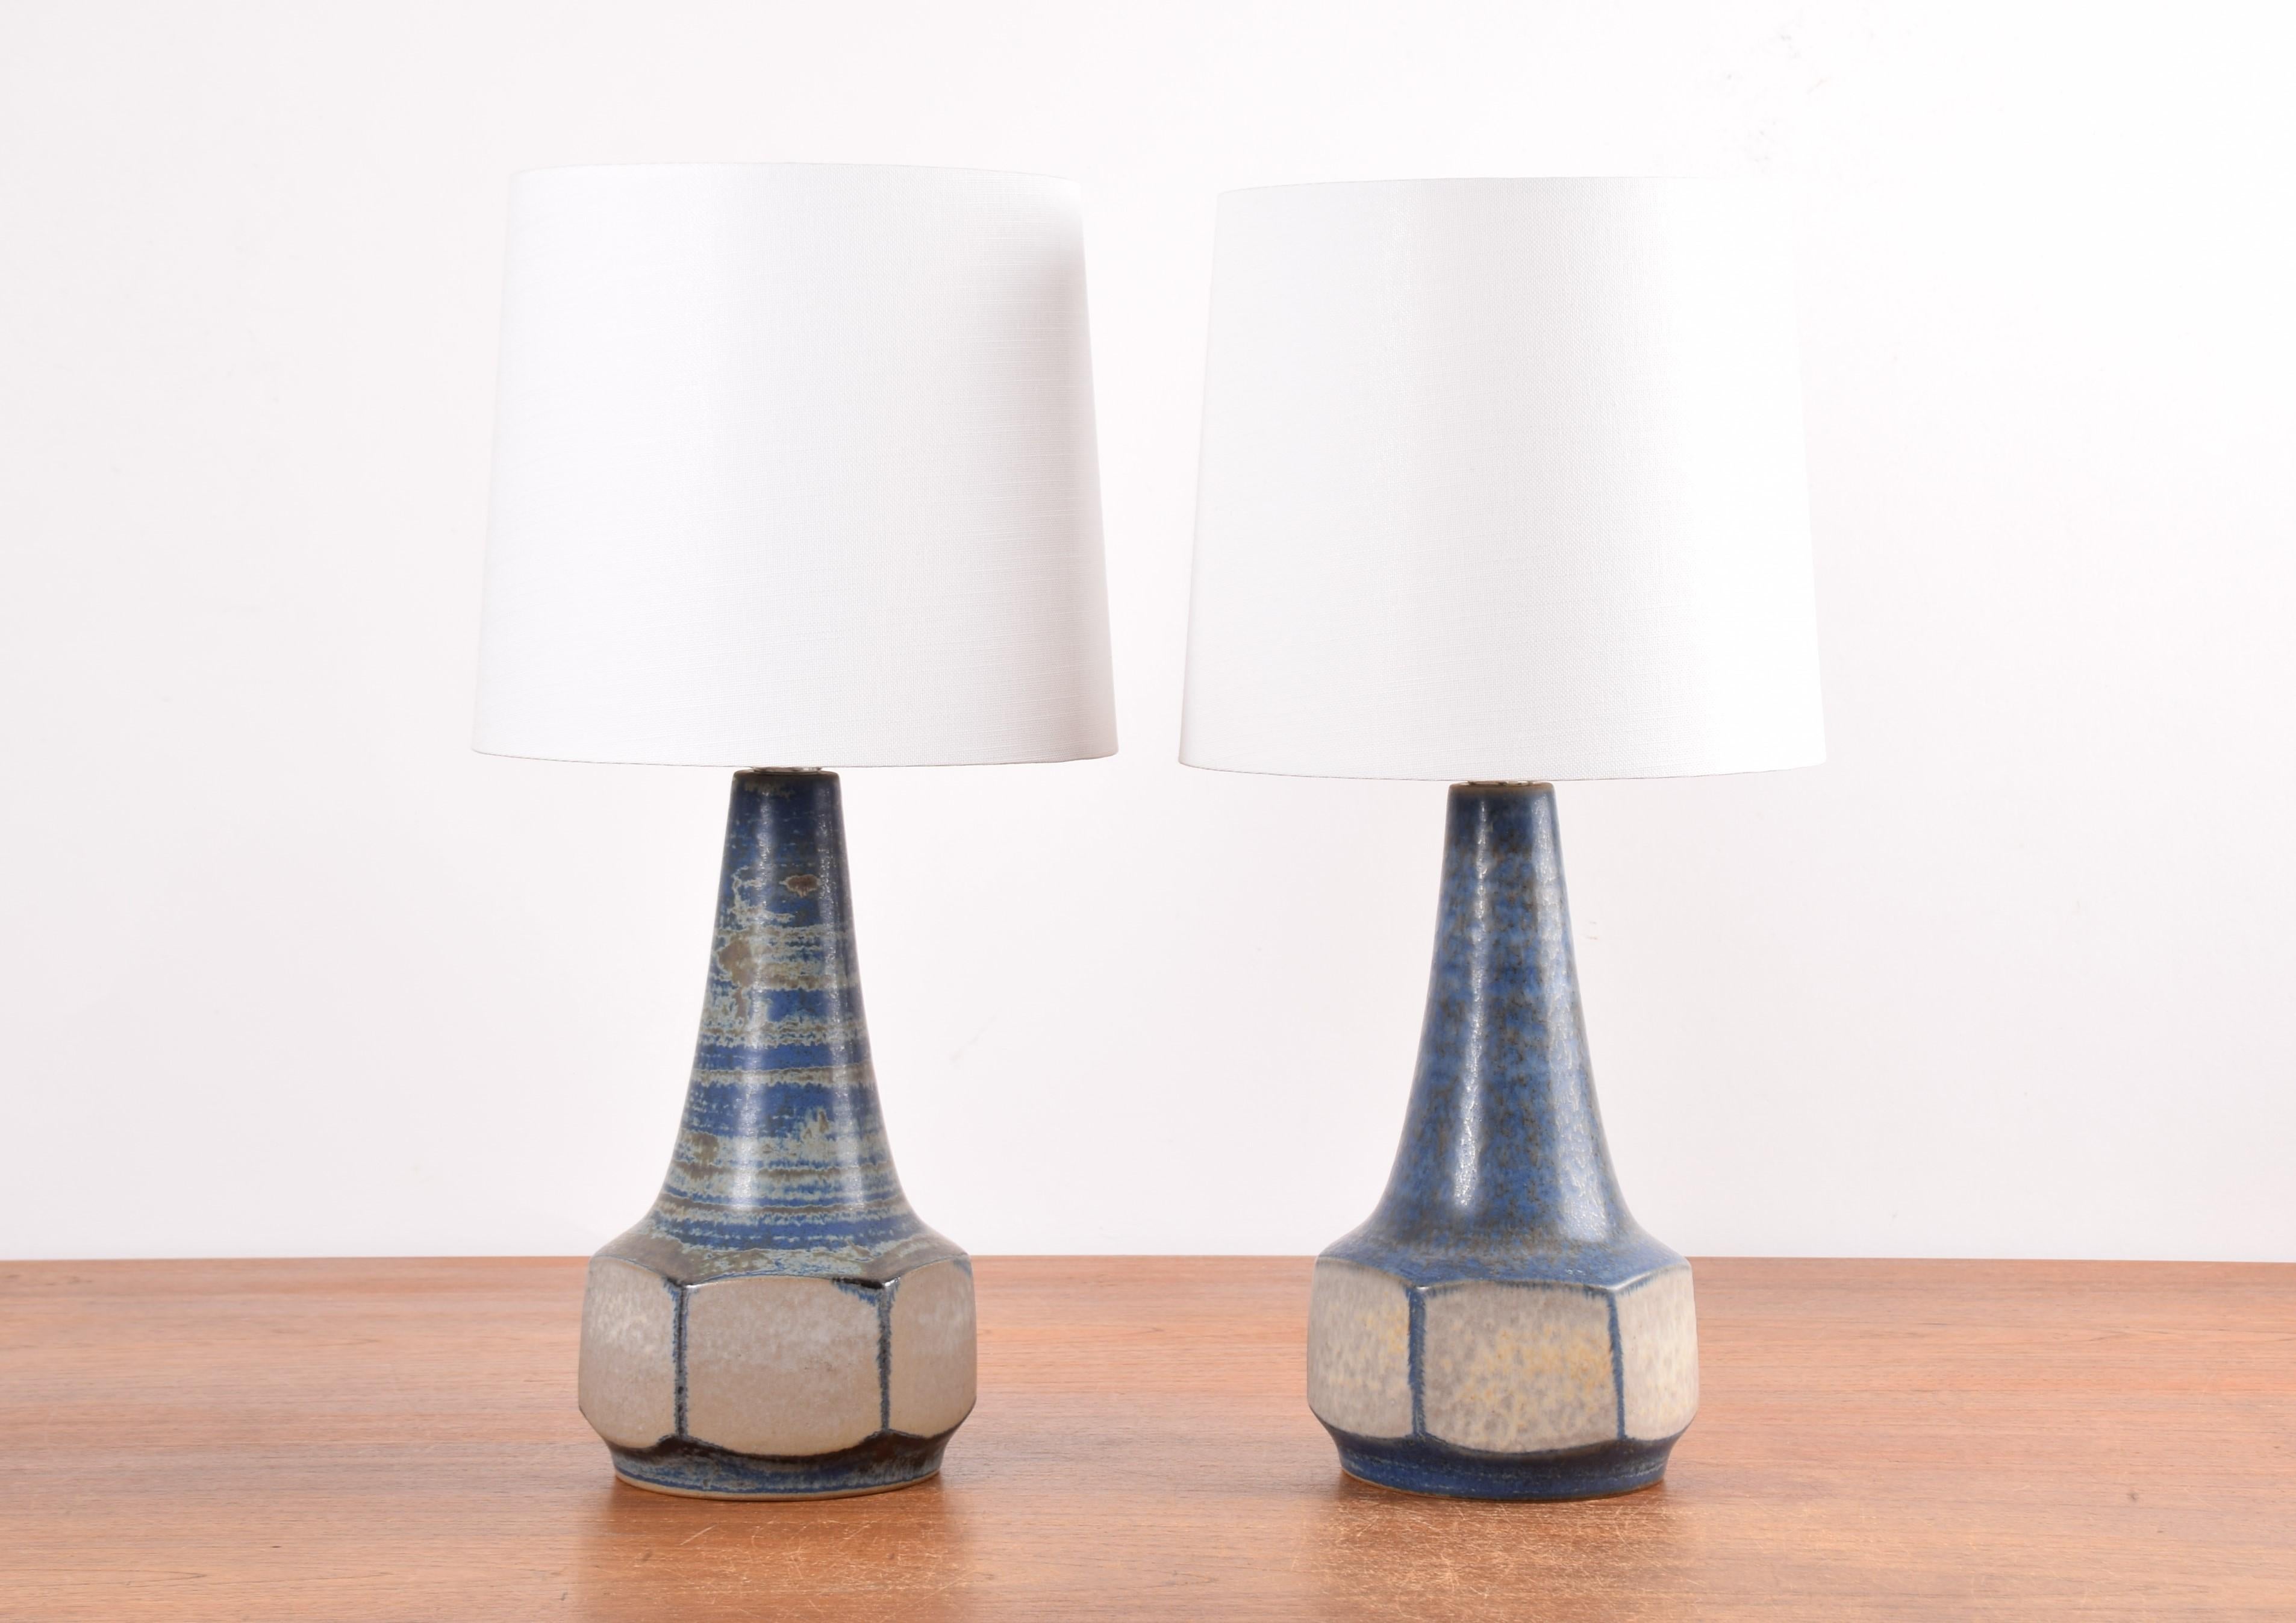 Pair of table lamps designed by Marianne Starck for Michael Andersen. Made ca 1960s or 1970s.
The lamps are made of stoneware and have a matte blue and gray glaze with some beige elements.
Due to the firing process the glaze has a unique